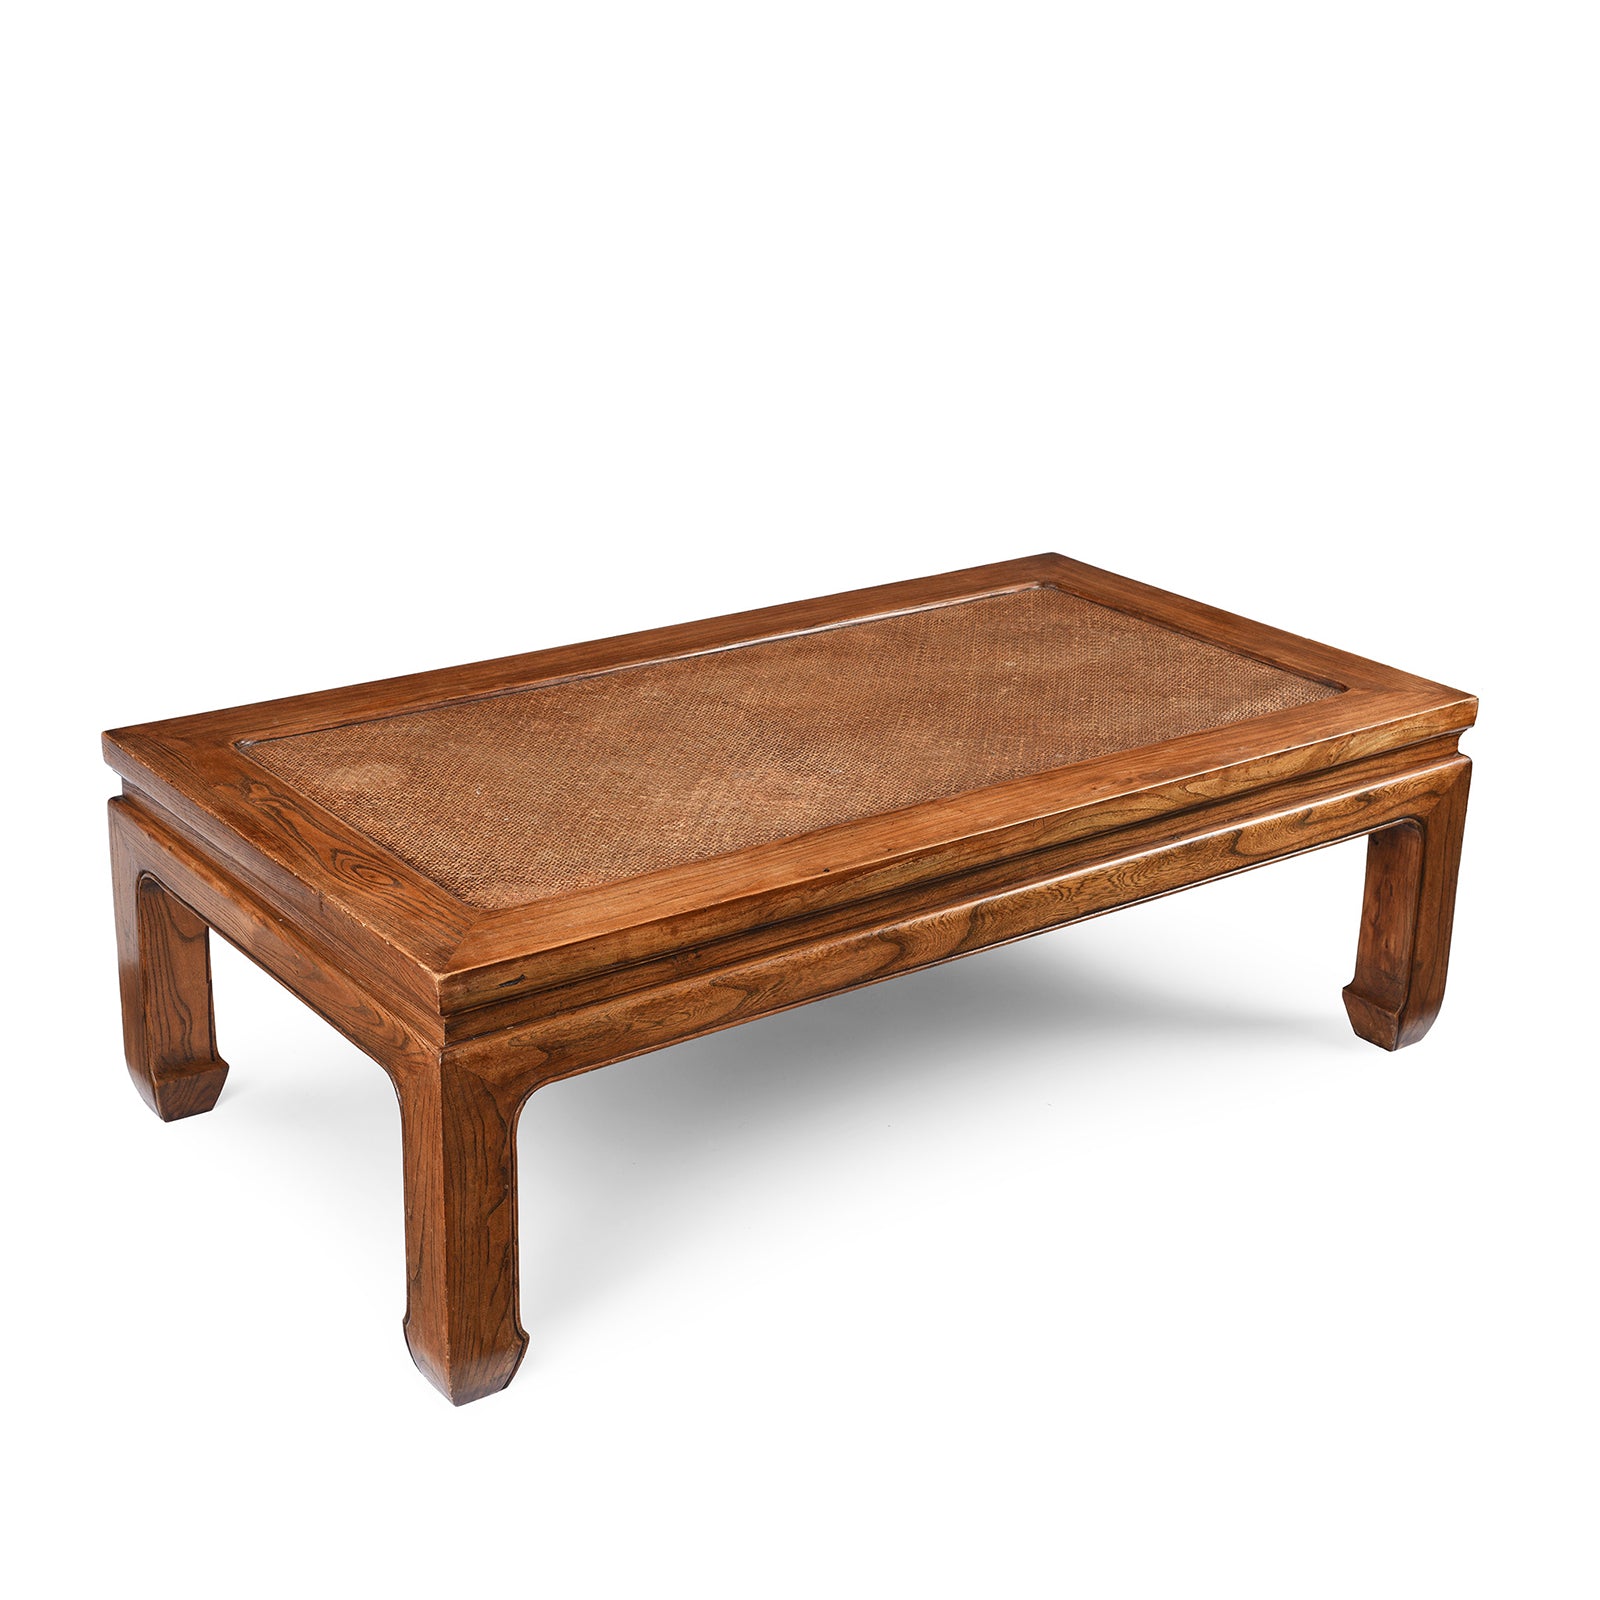 Reproduction Cane Top Coffee Table Made From Old Elm | Indigo Antiques